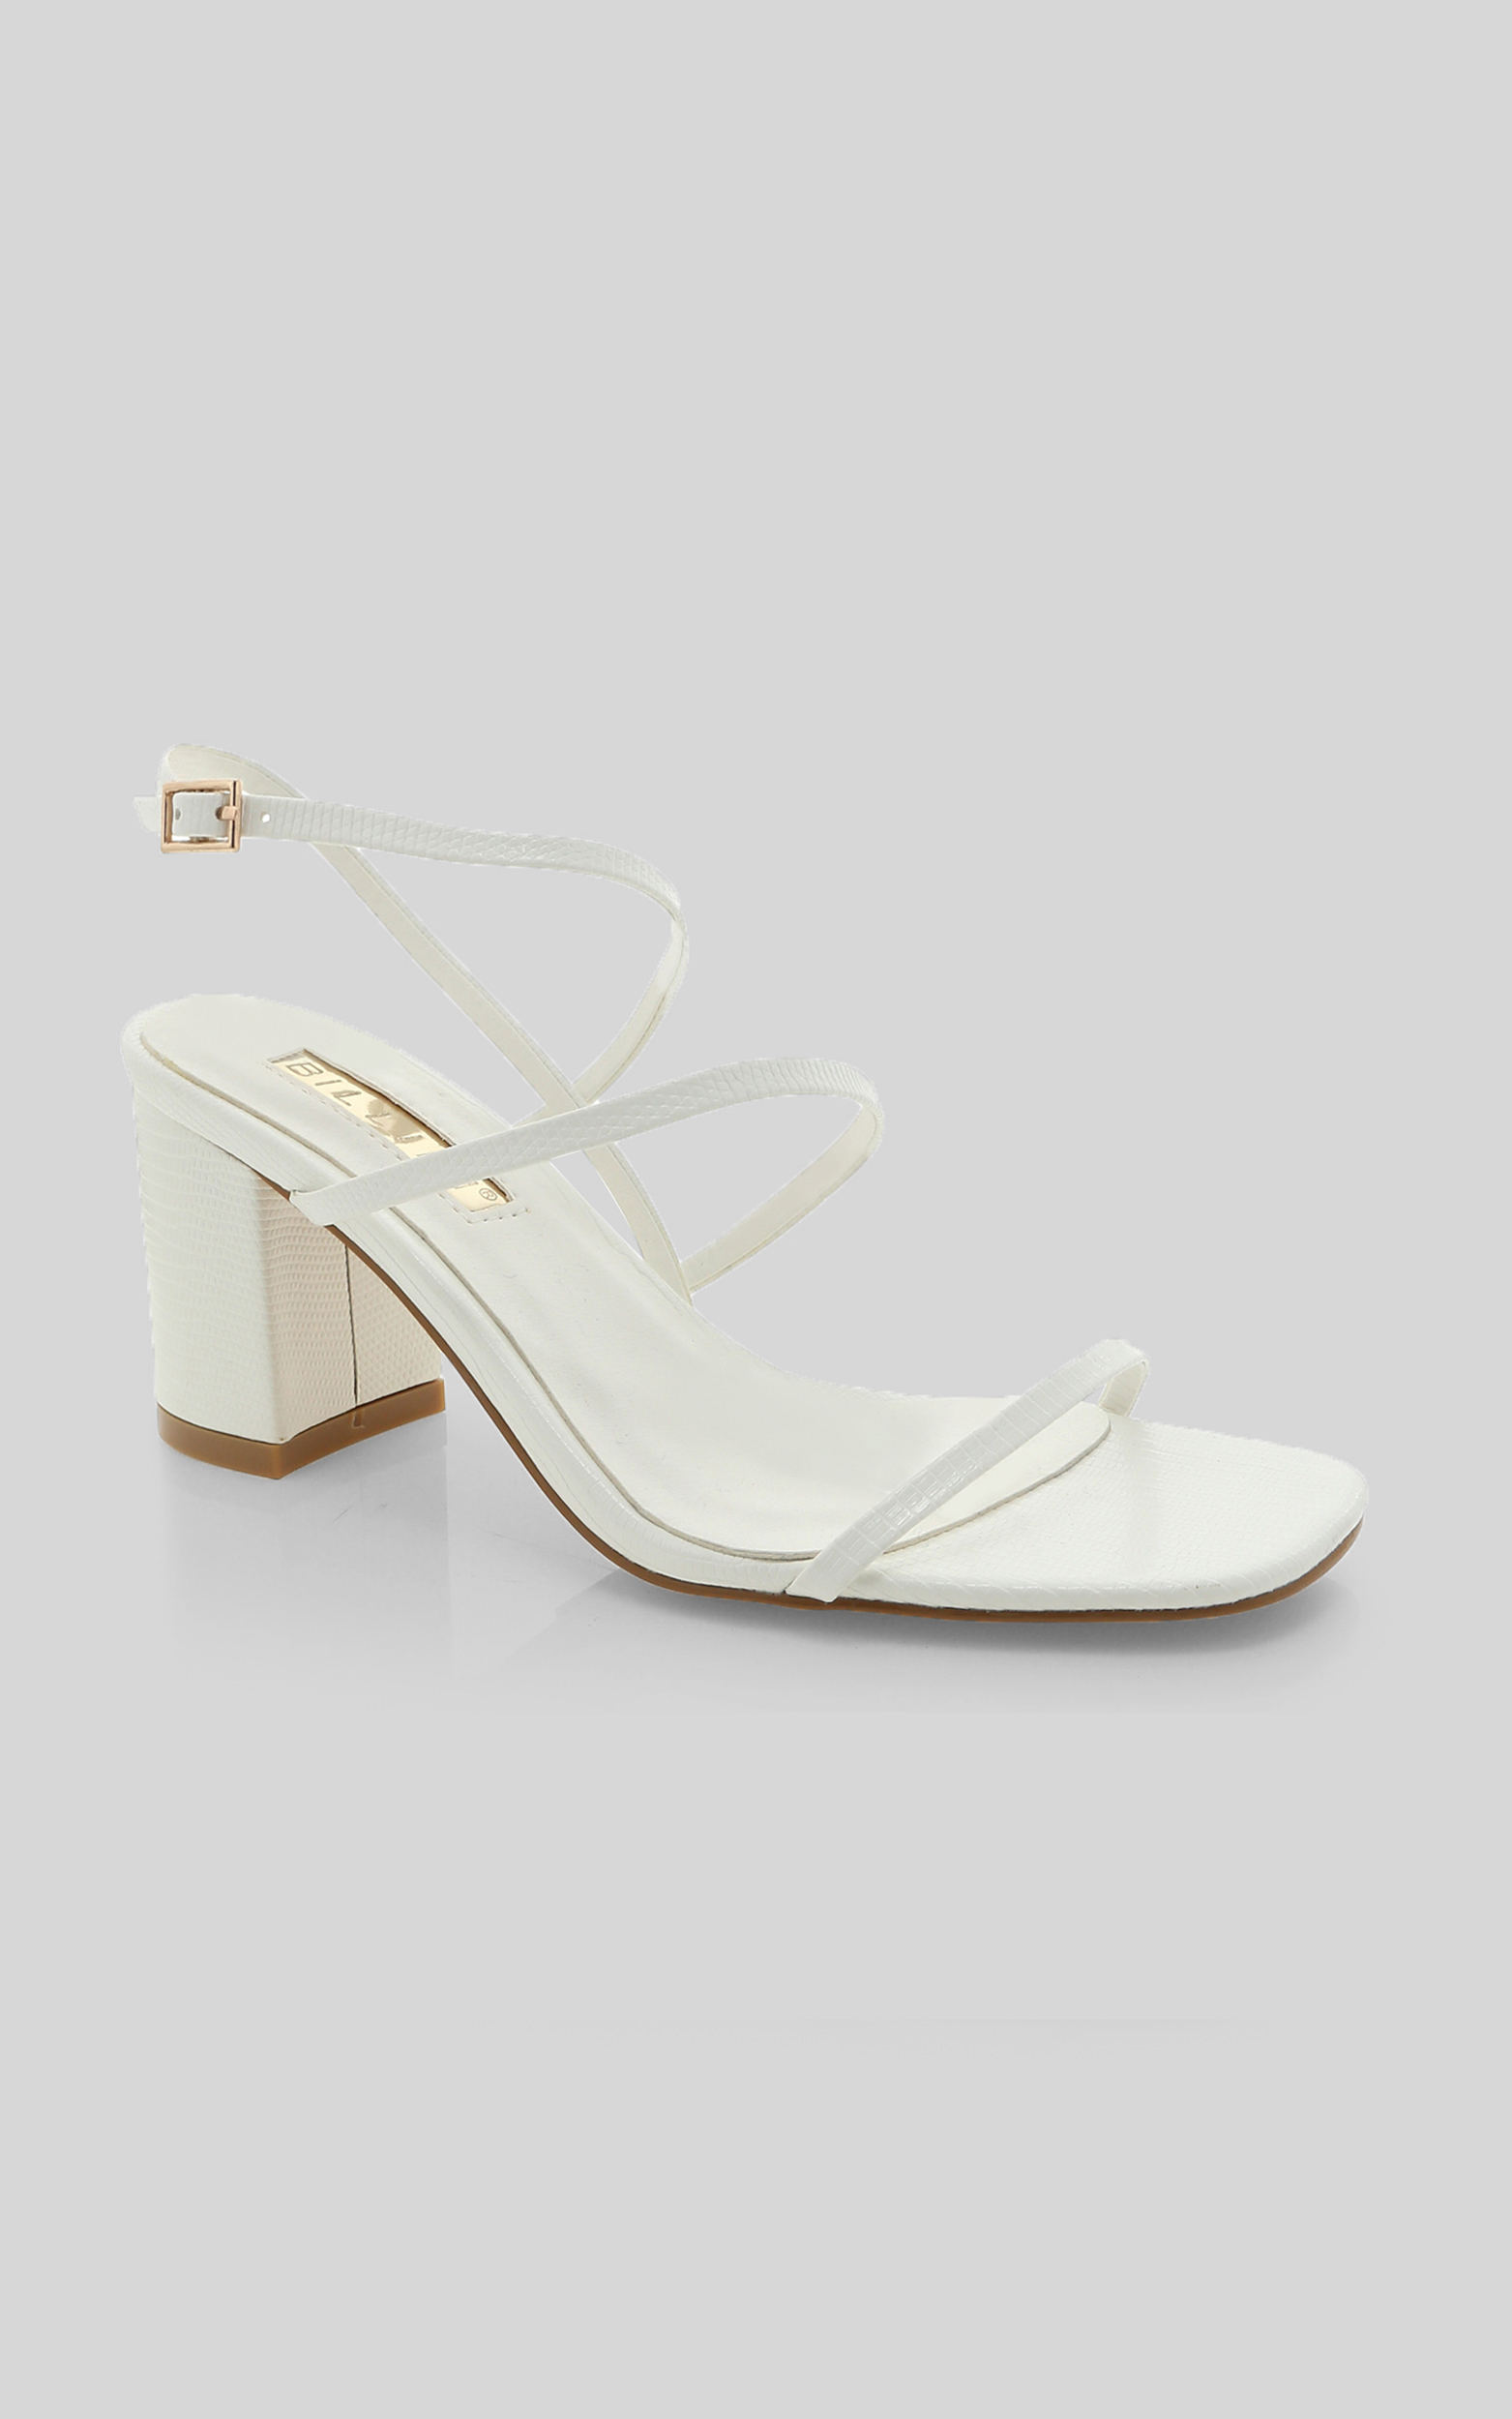 Billini - Yesenia Heels in White Scale - 05, WHT2, hi-res image number null